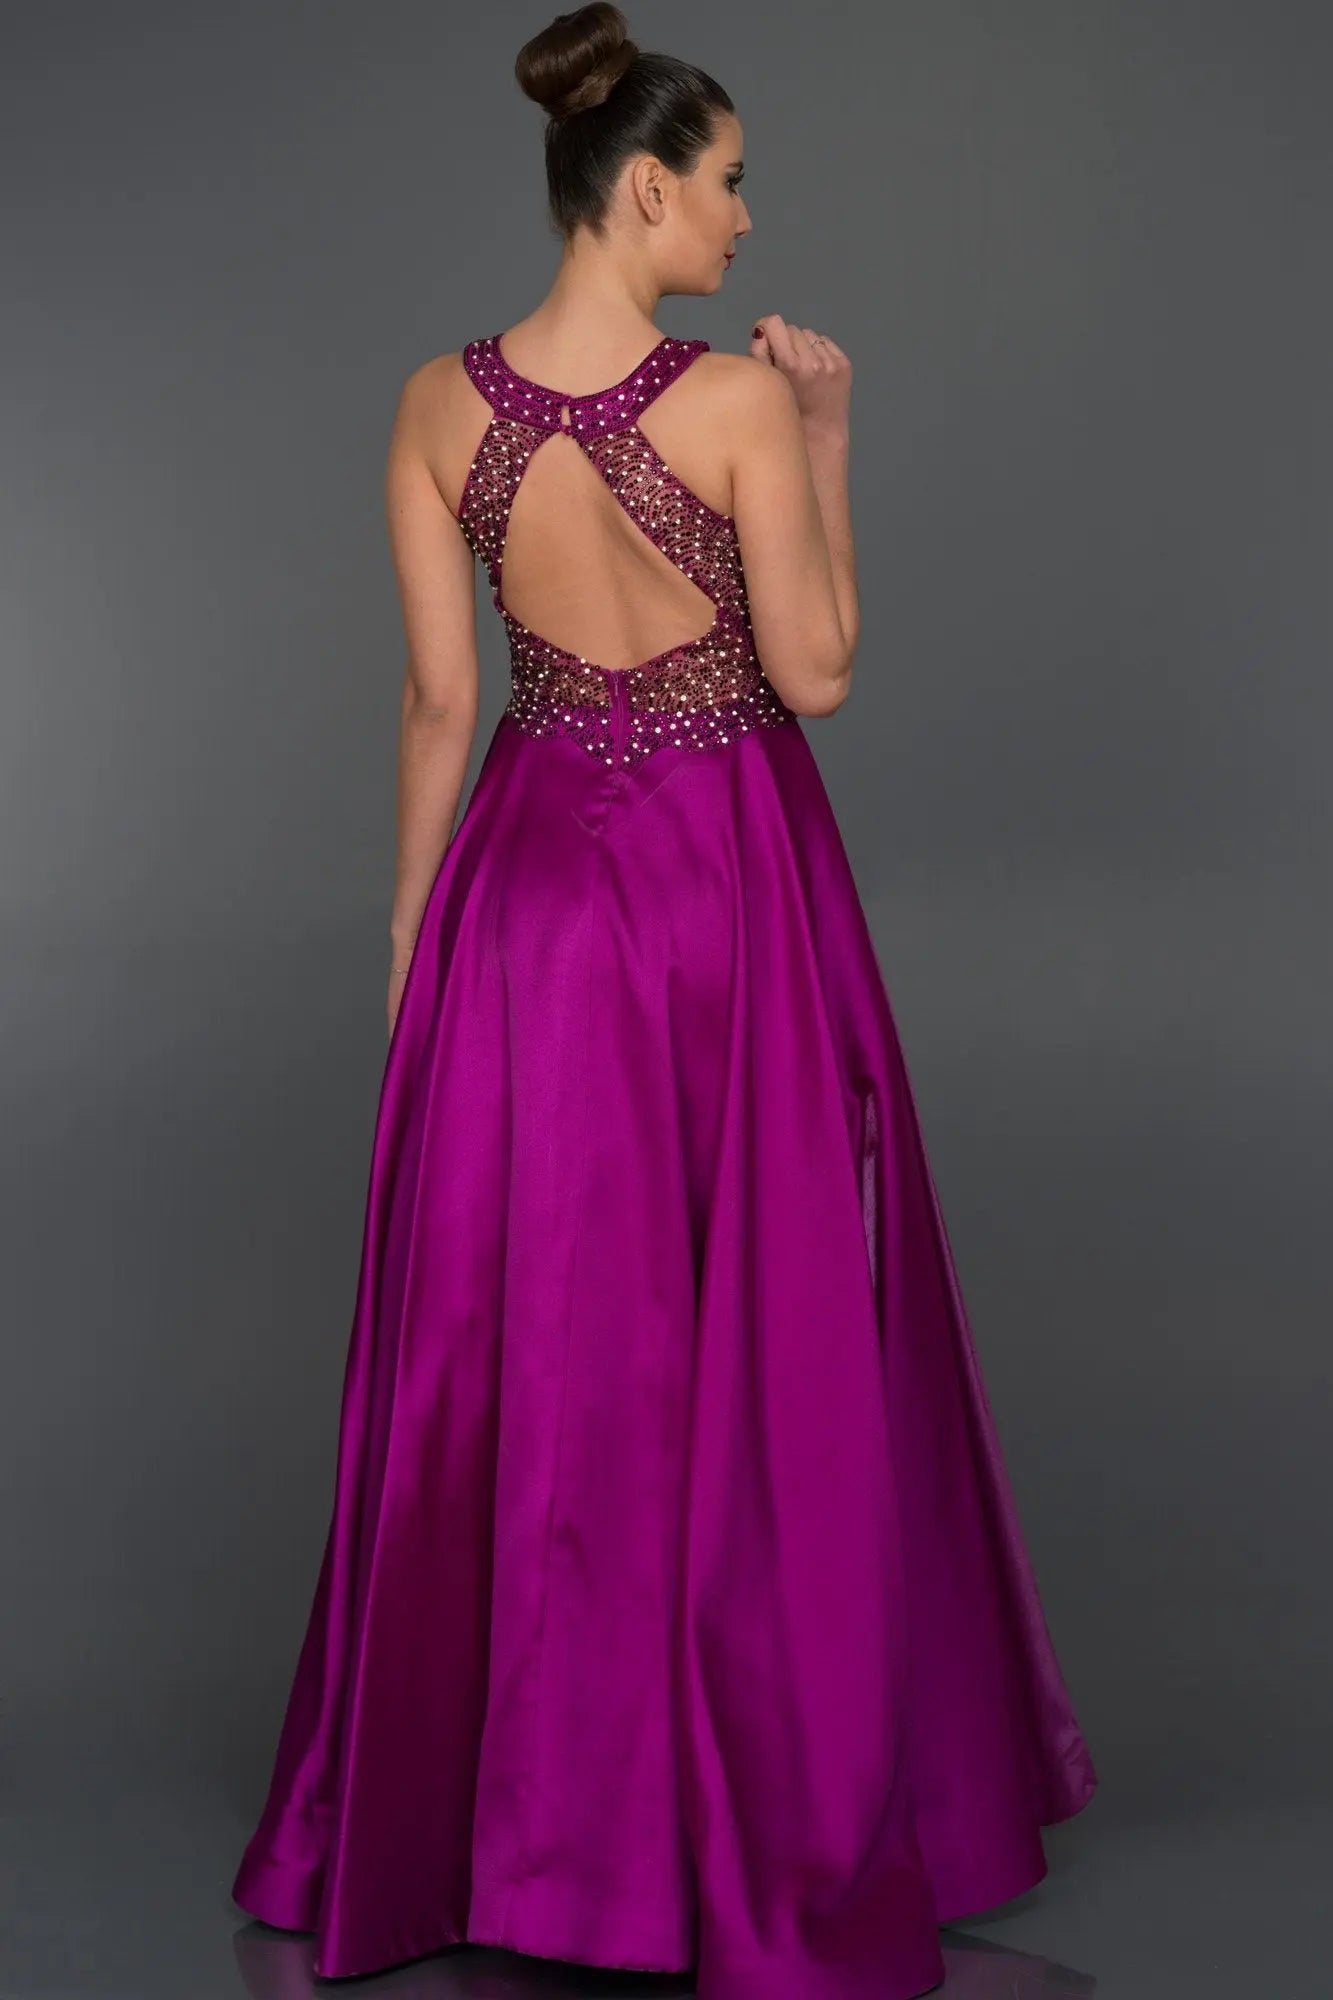 Turn heads at your next special occasion with this show-stopping dress from Aisha Fashion World. The fuchsia bodice is adorned with intricate beading and embroidery, while the flowing skirt cascades to the floor in fuchsia. The dress is made from high-quality materials and is sure to make you feel like a princess.